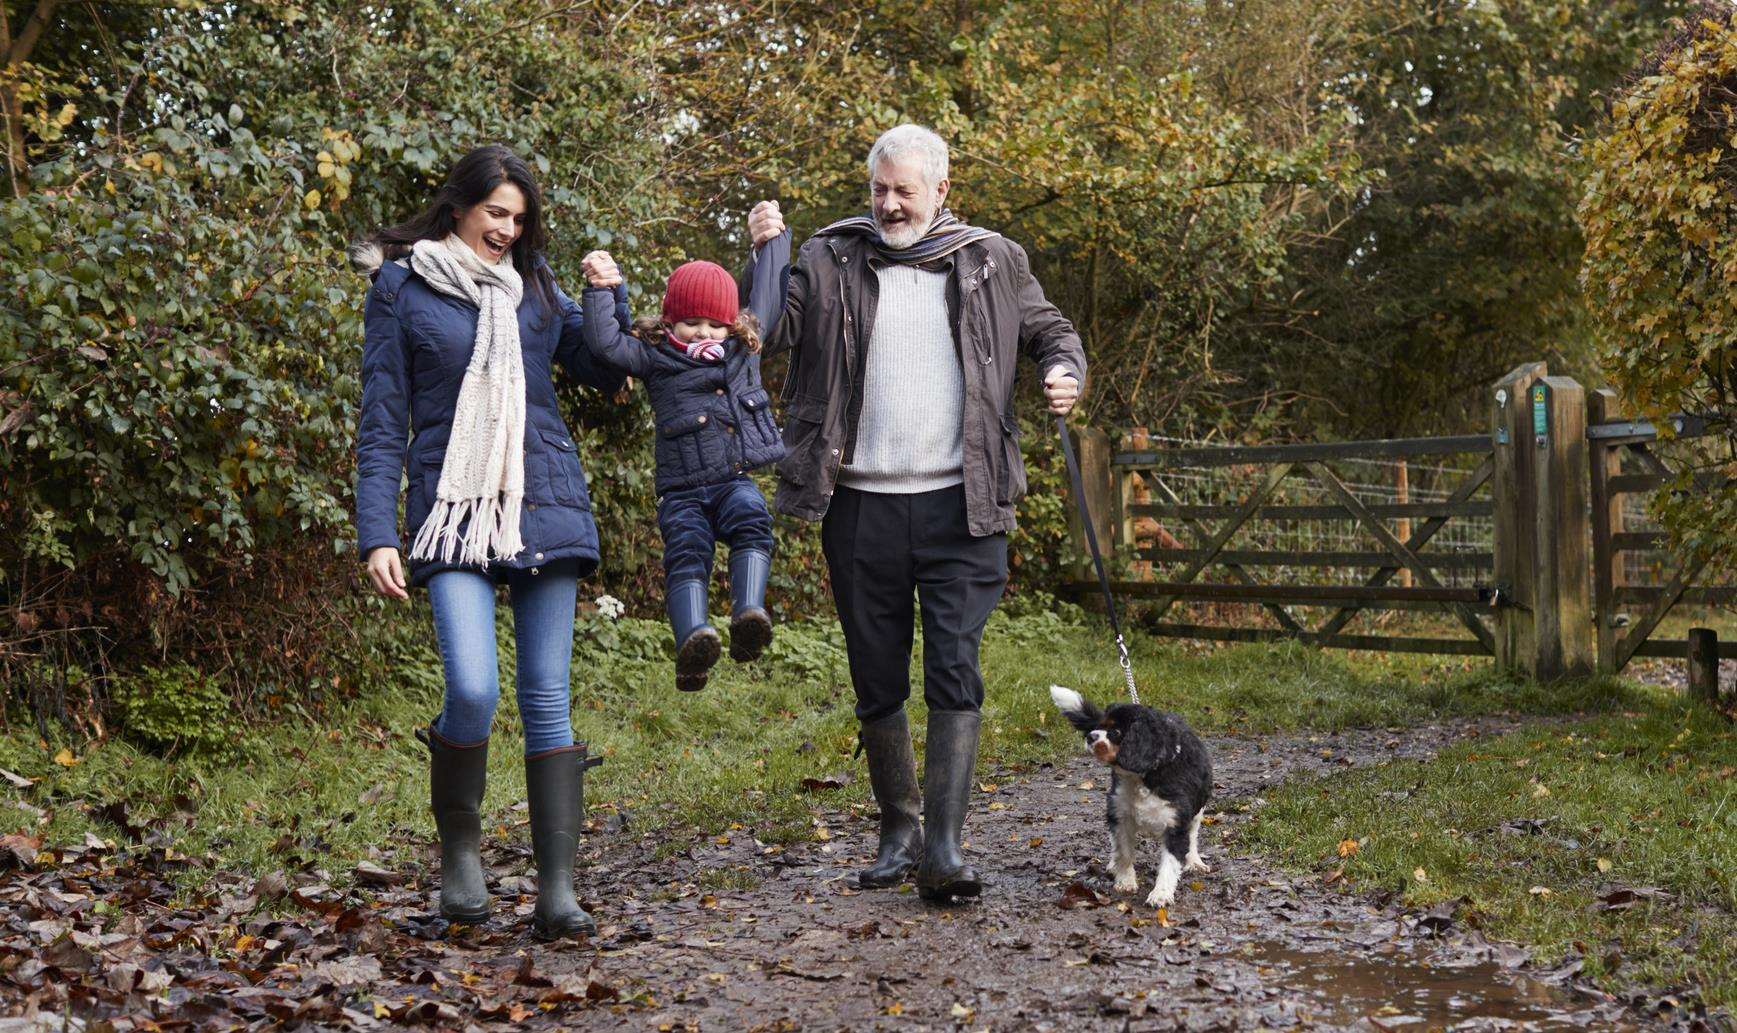 Taking a dog for a walk can be an ideal way to persuade the family out the house